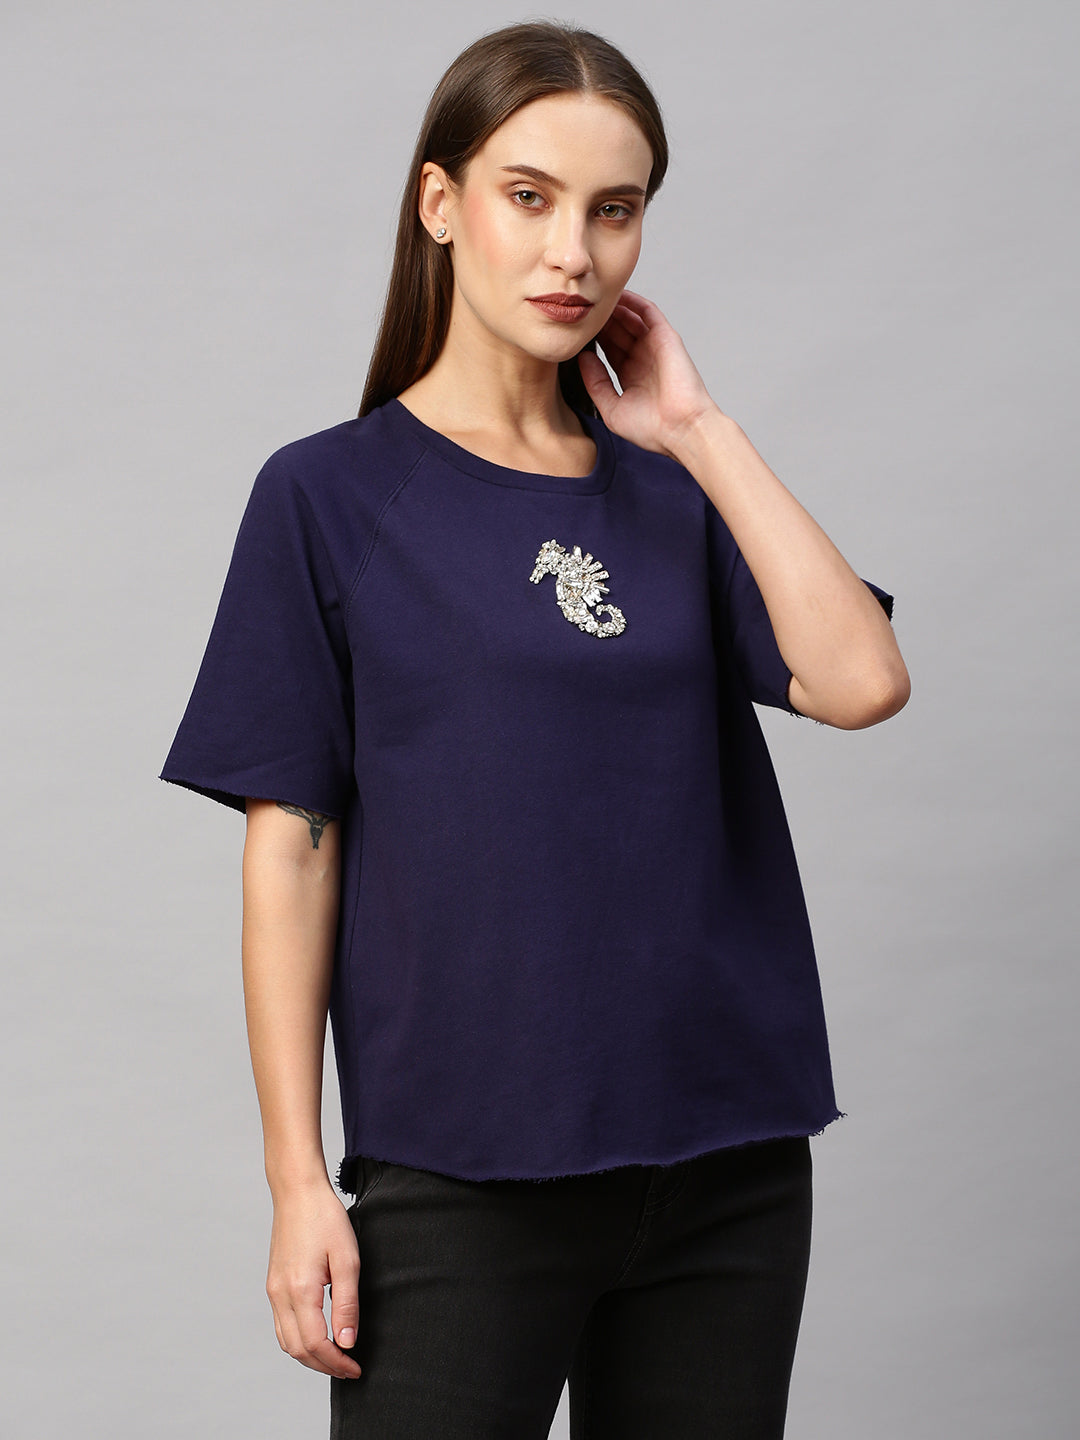 French Terry Raglan Sleeved Sweatshirt With "Sea-Horse" Embroidery